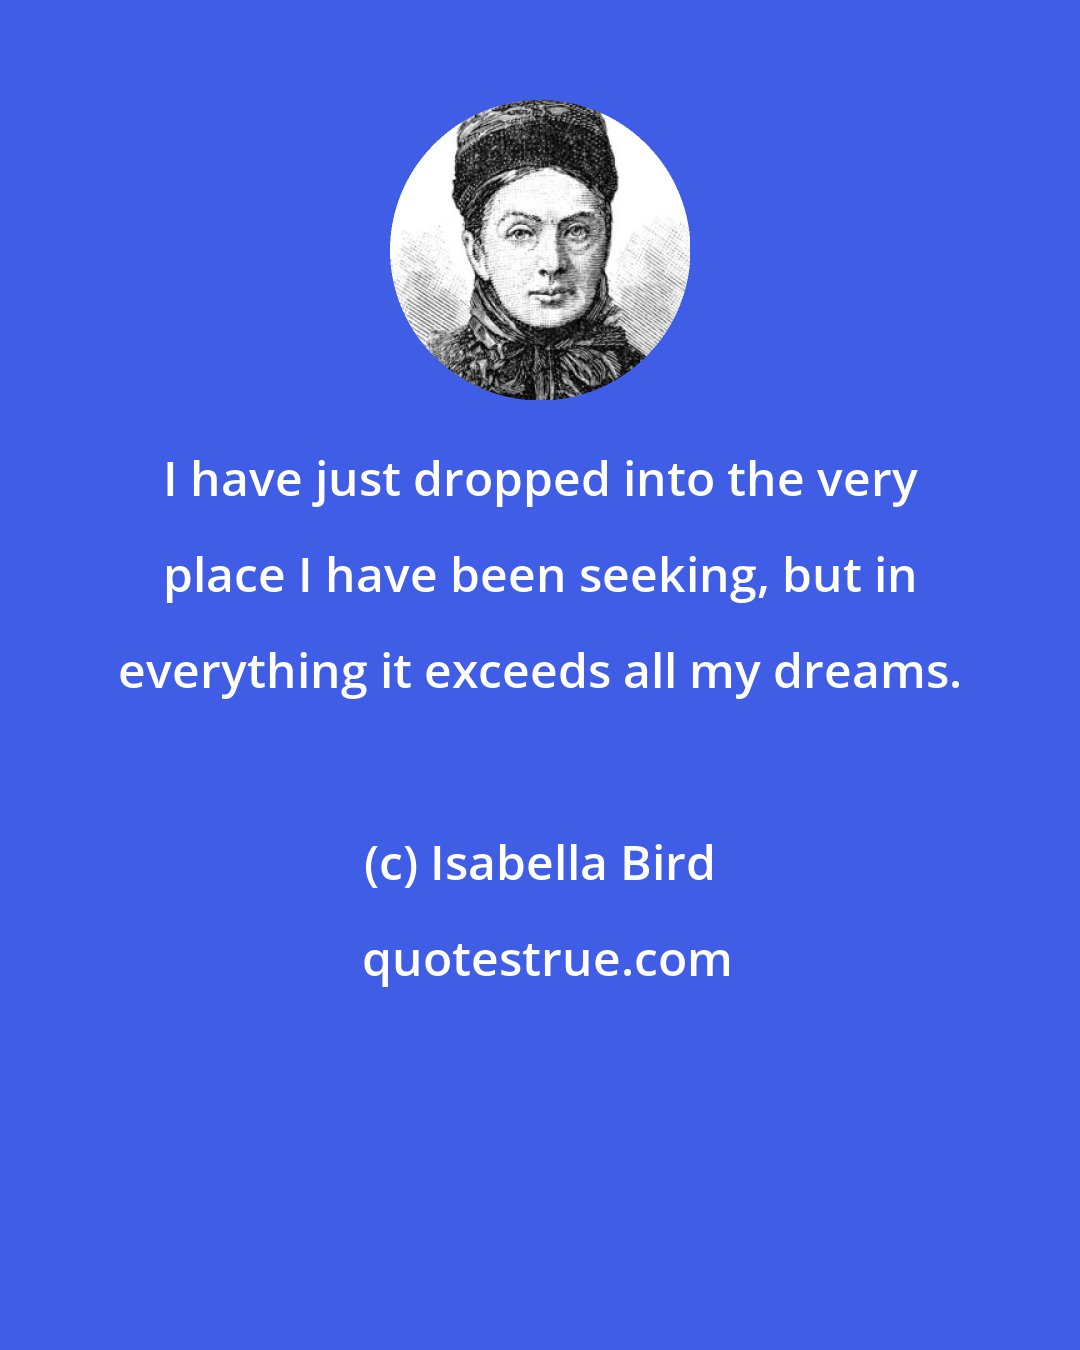 Isabella Bird: I have just dropped into the very place I have been seeking, but in everything it exceeds all my dreams.